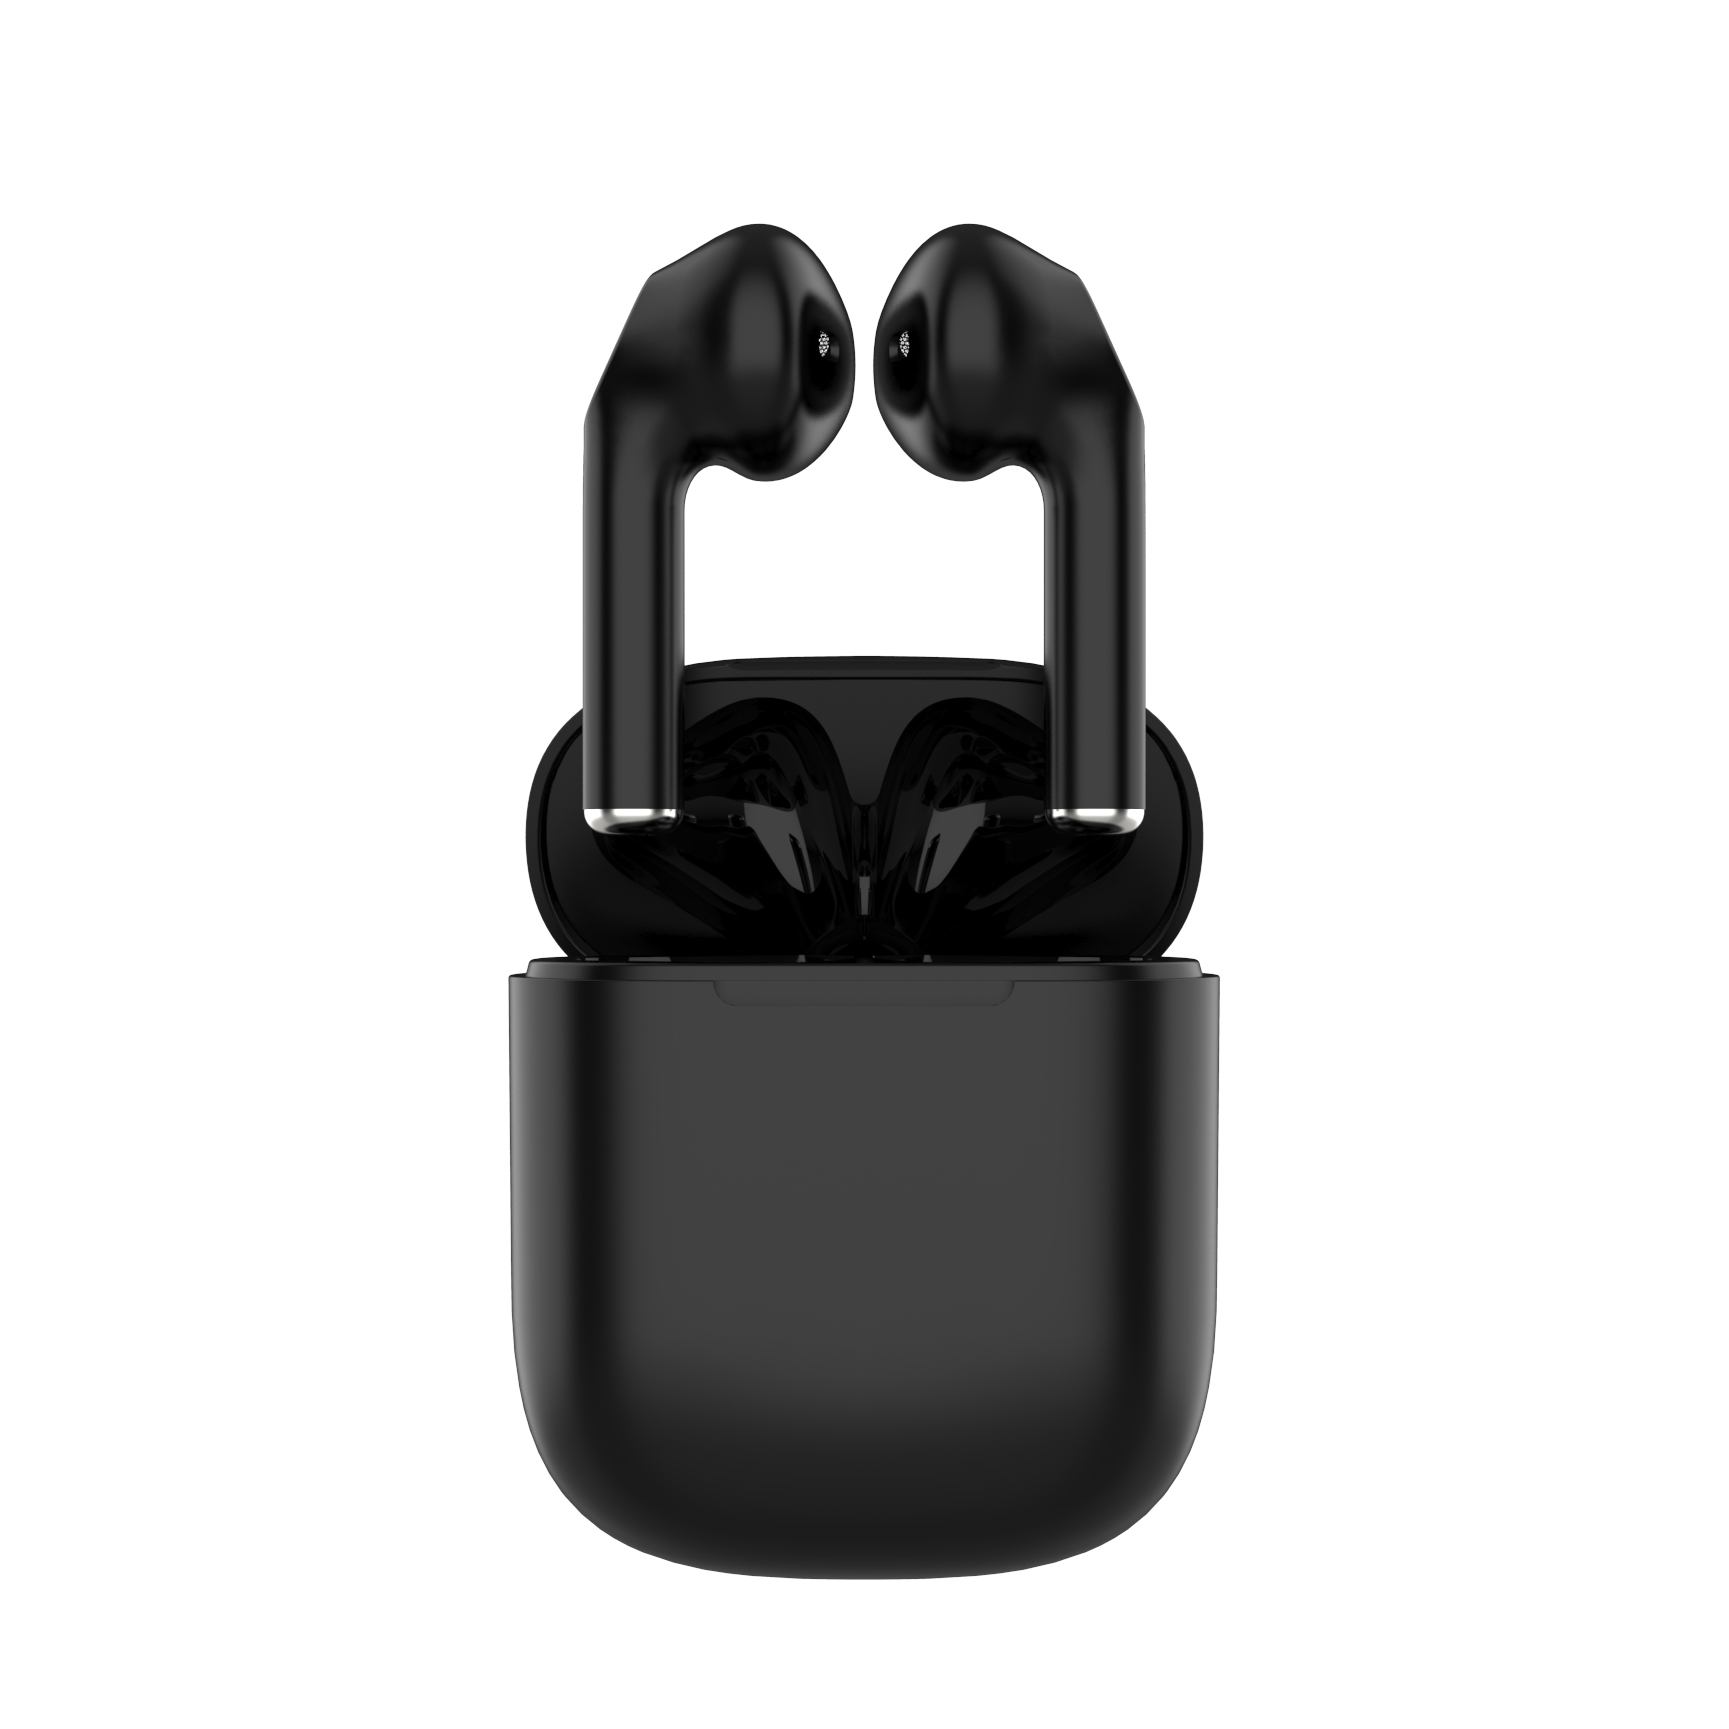 SMS-T17 Wireless Earbuds, Noise-Canceling Bluetooth Earphones, For High-Definition In-ear Stereo calls, touch control sports earphones, waterproof fitness earbuds, USB-C charging